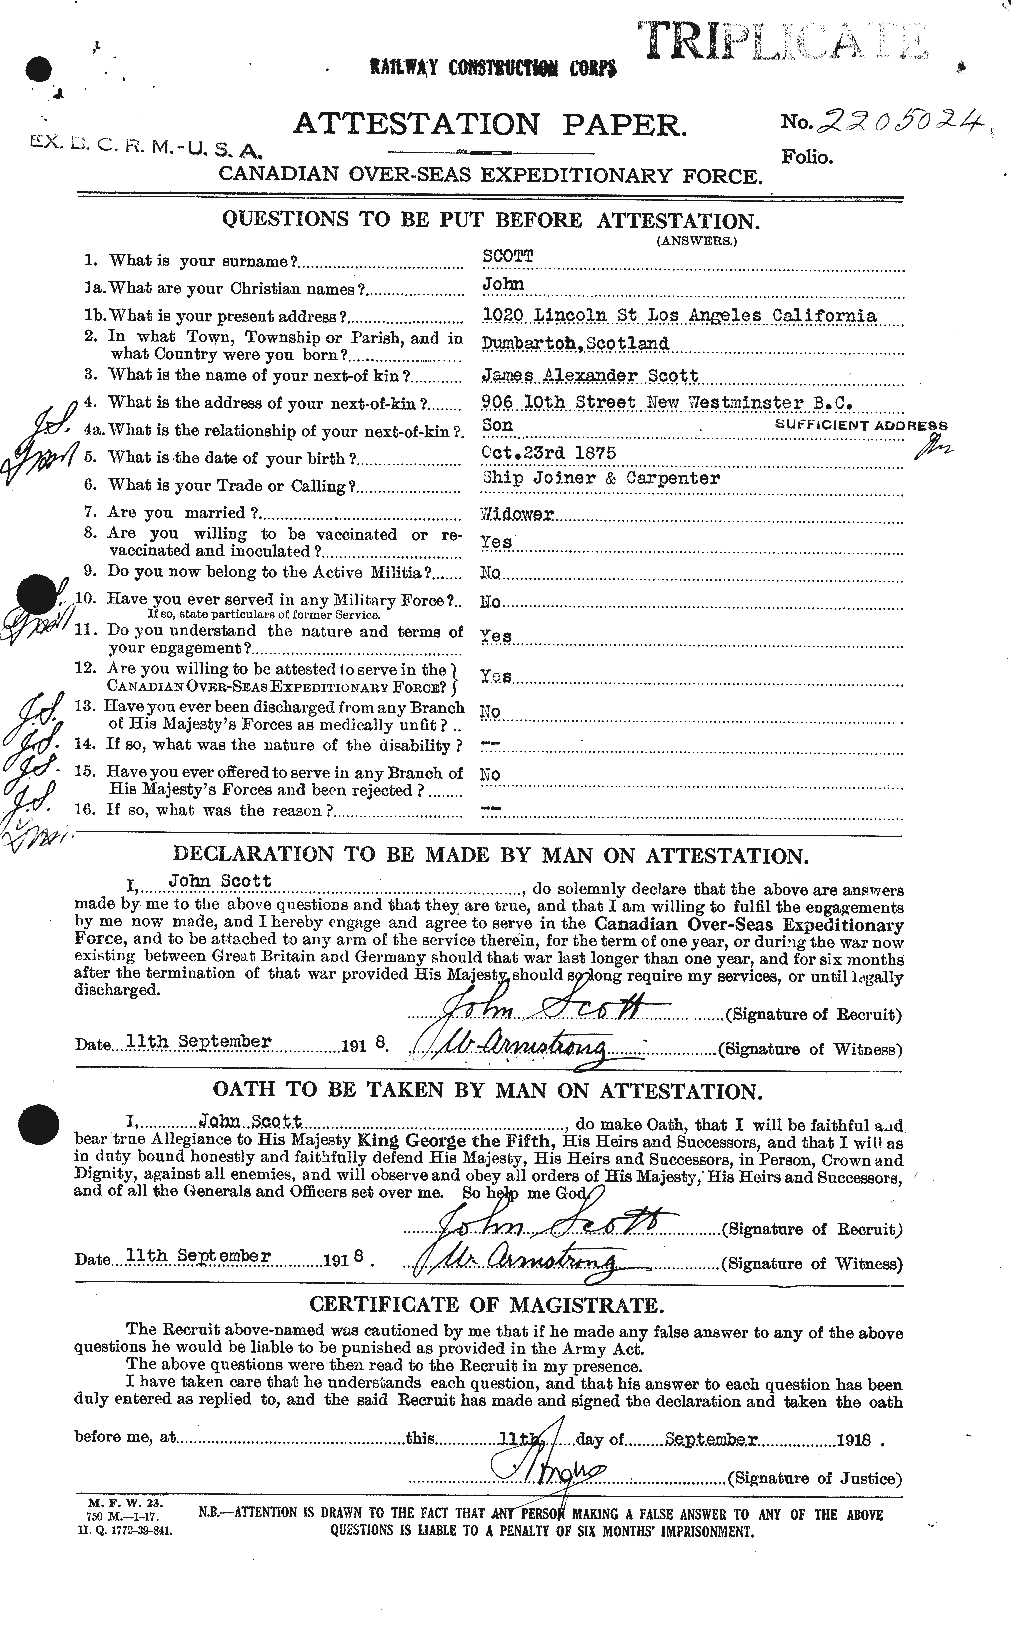 Personnel Records of the First World War - CEF 084920a